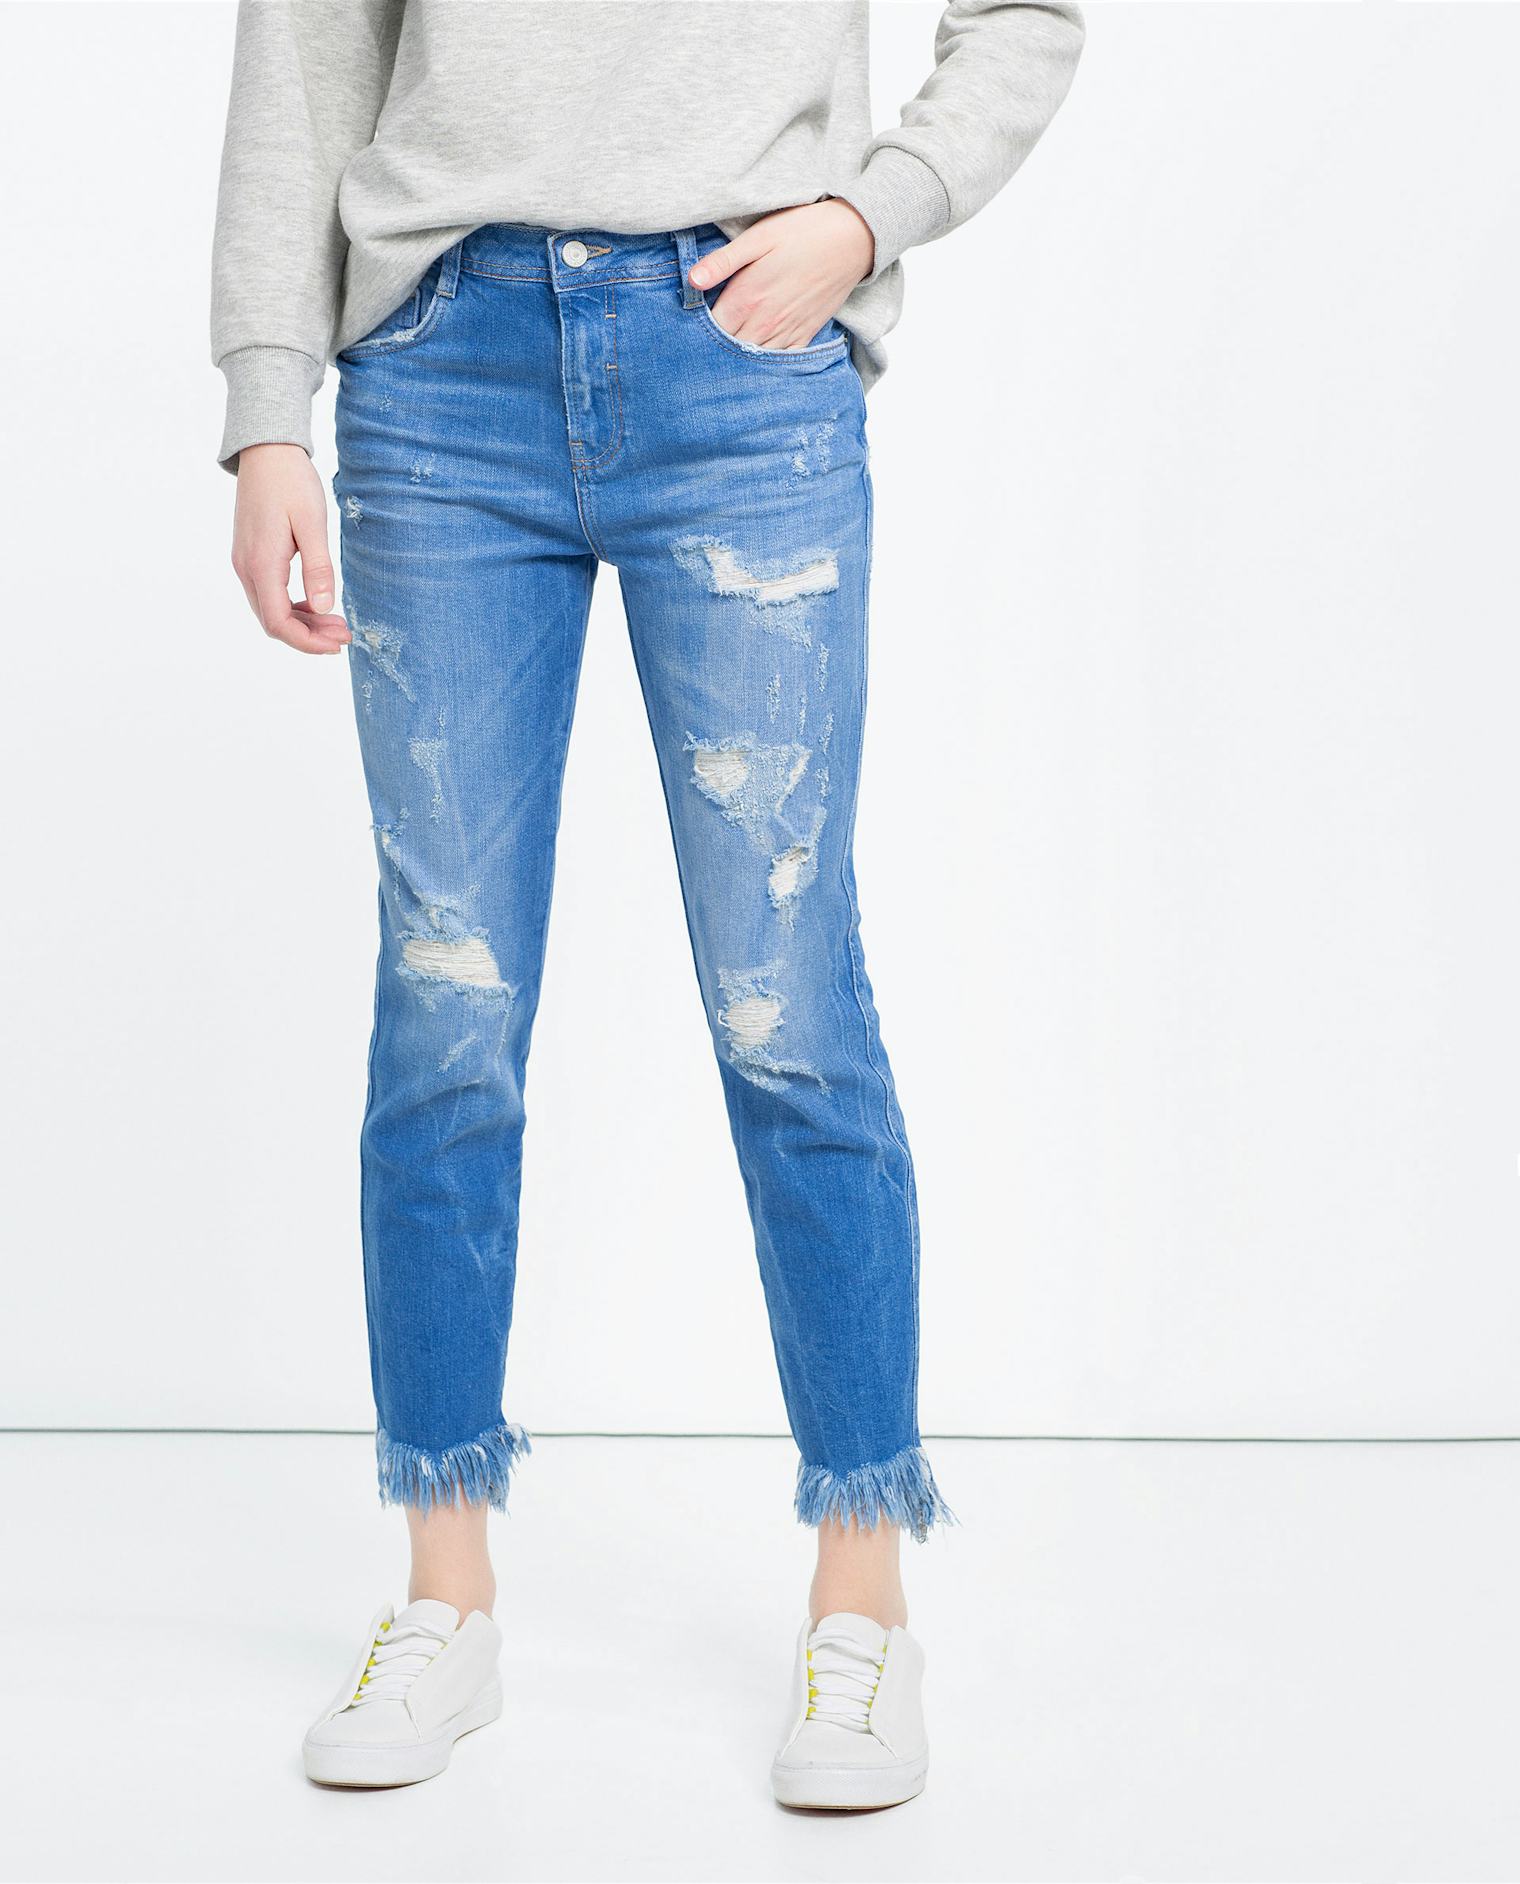 The Best Frayed Jeans